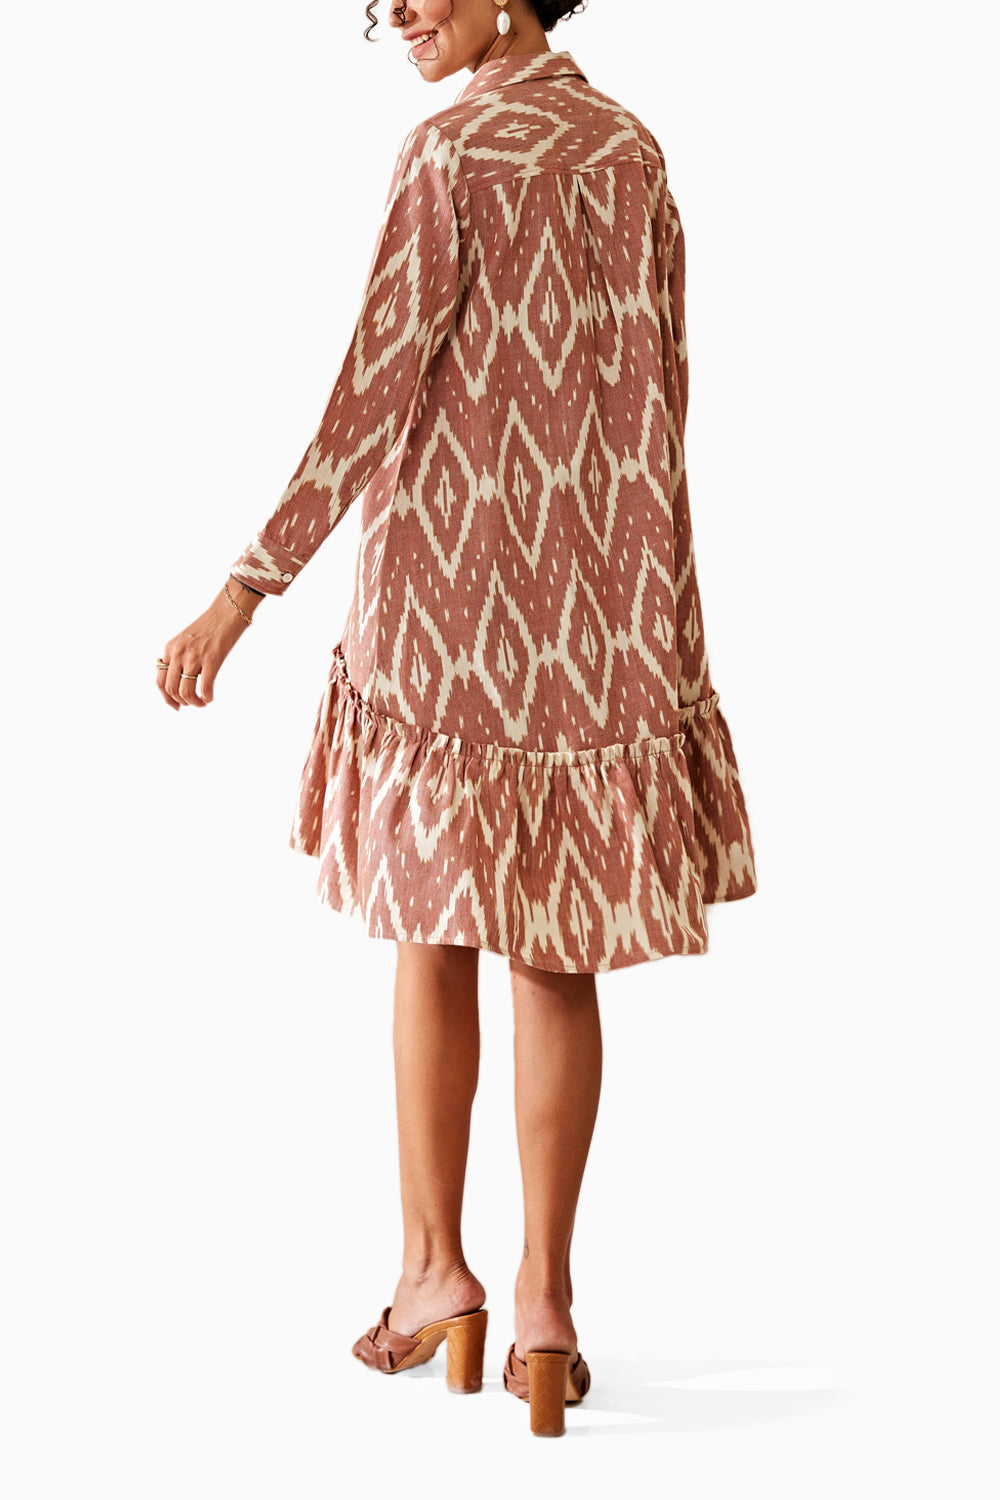 Rise and Fall Ikat Brown Dress